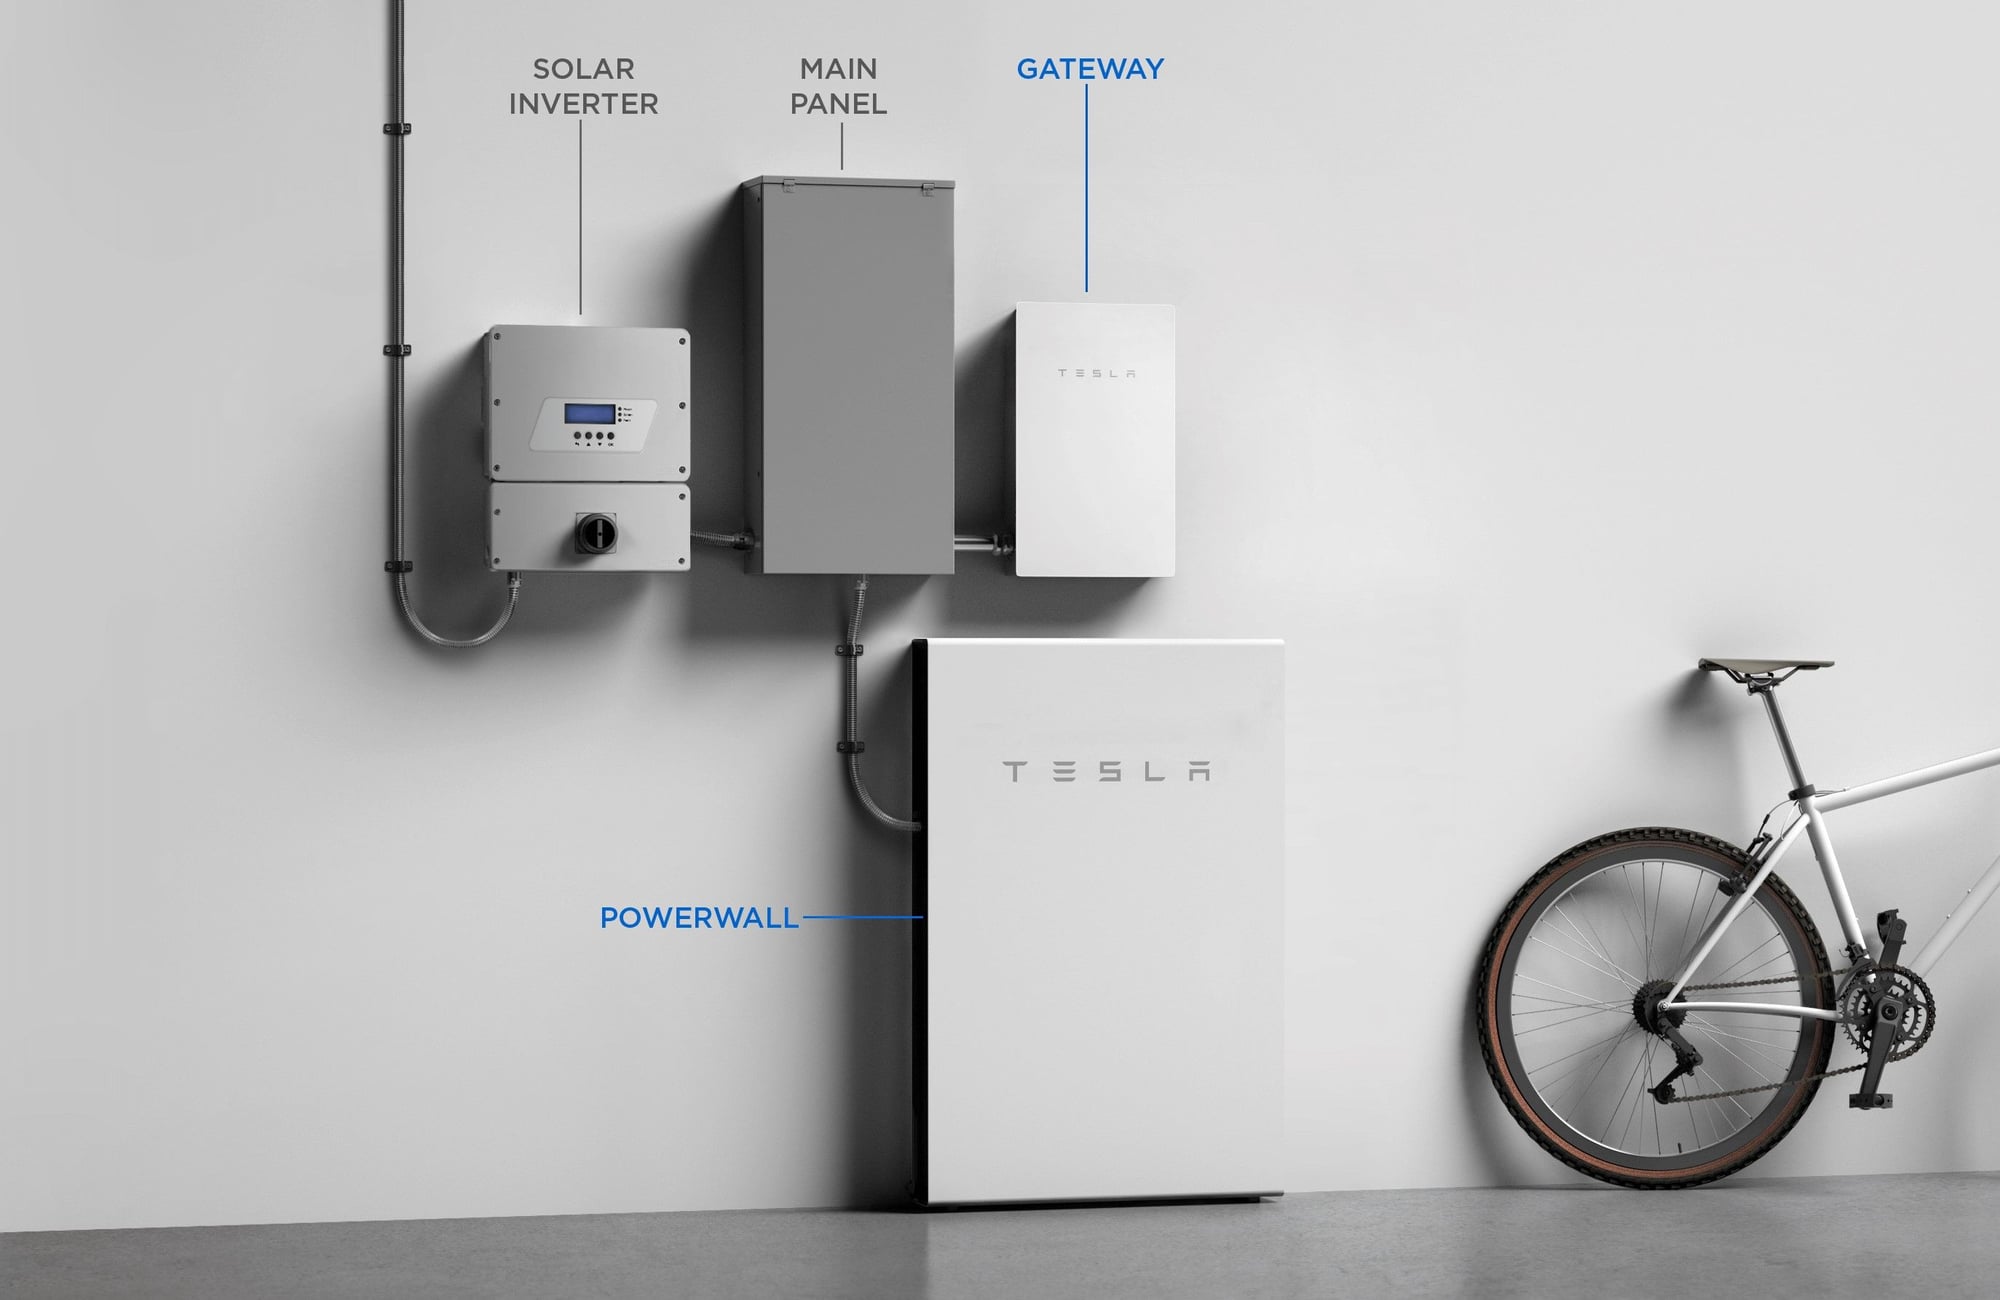 Tesla's Complete home photovoltaic system, complete with the company's new inverter.